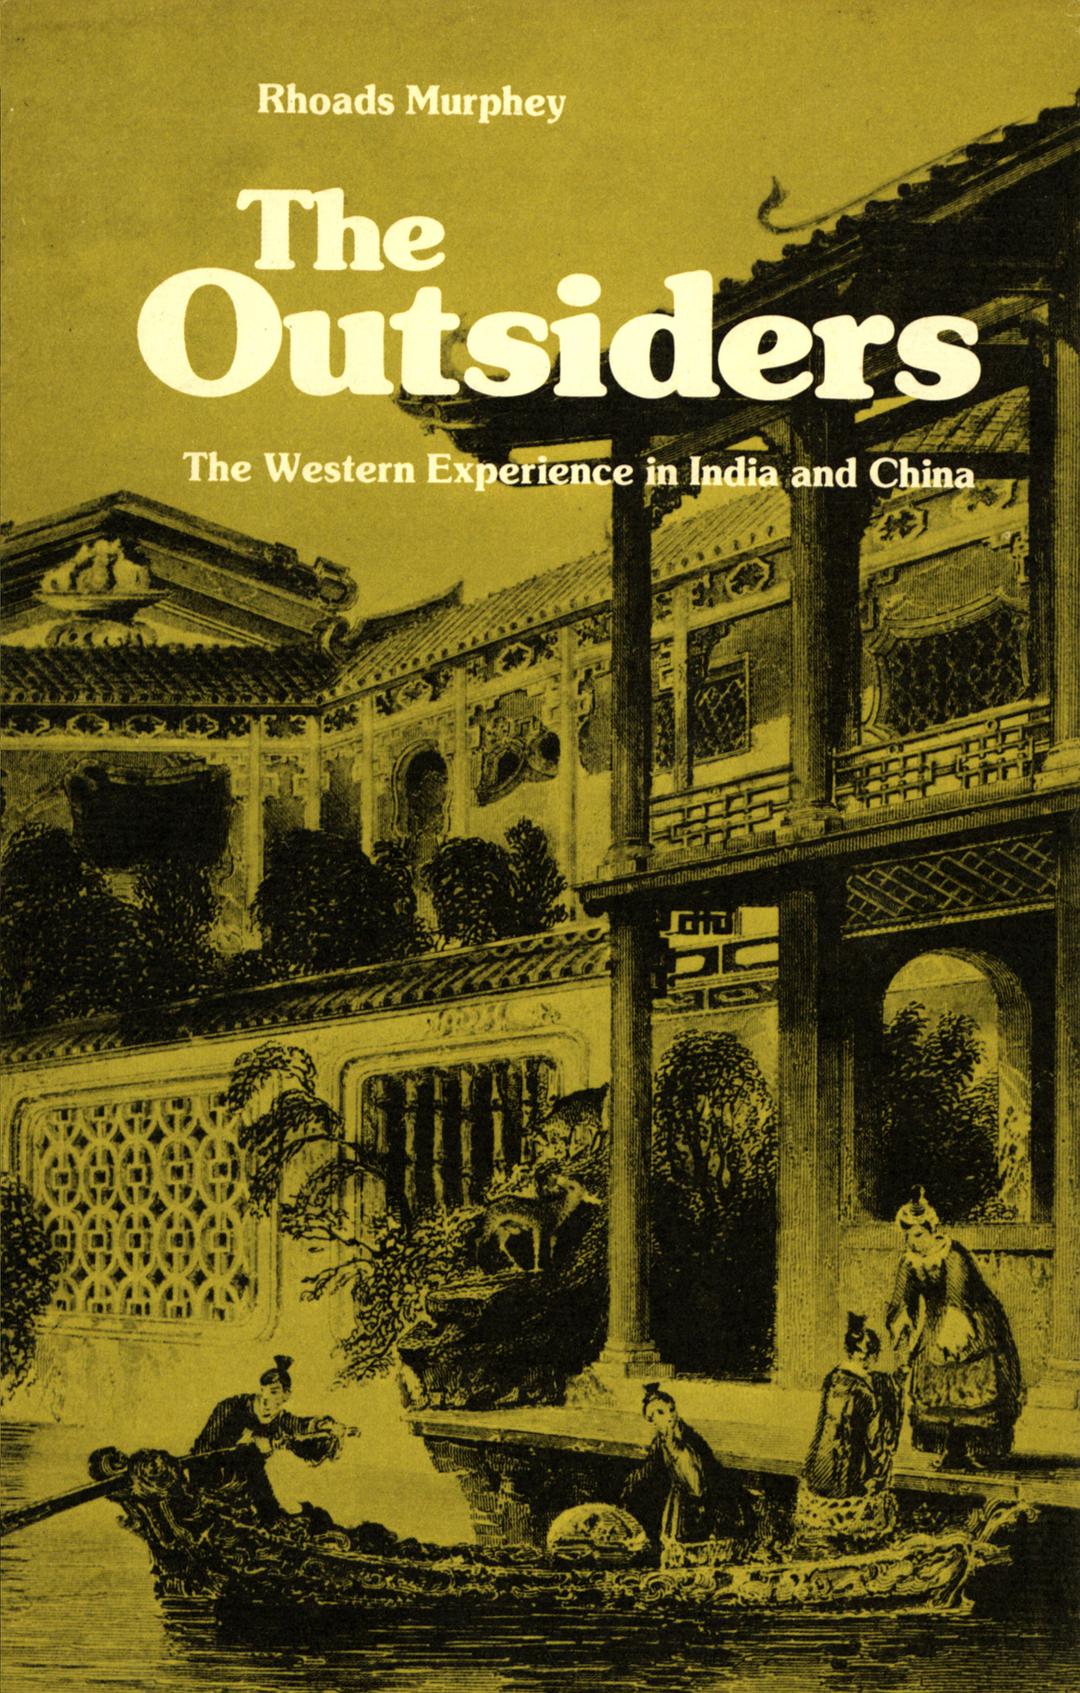 The outsiders the Western experience in India and China